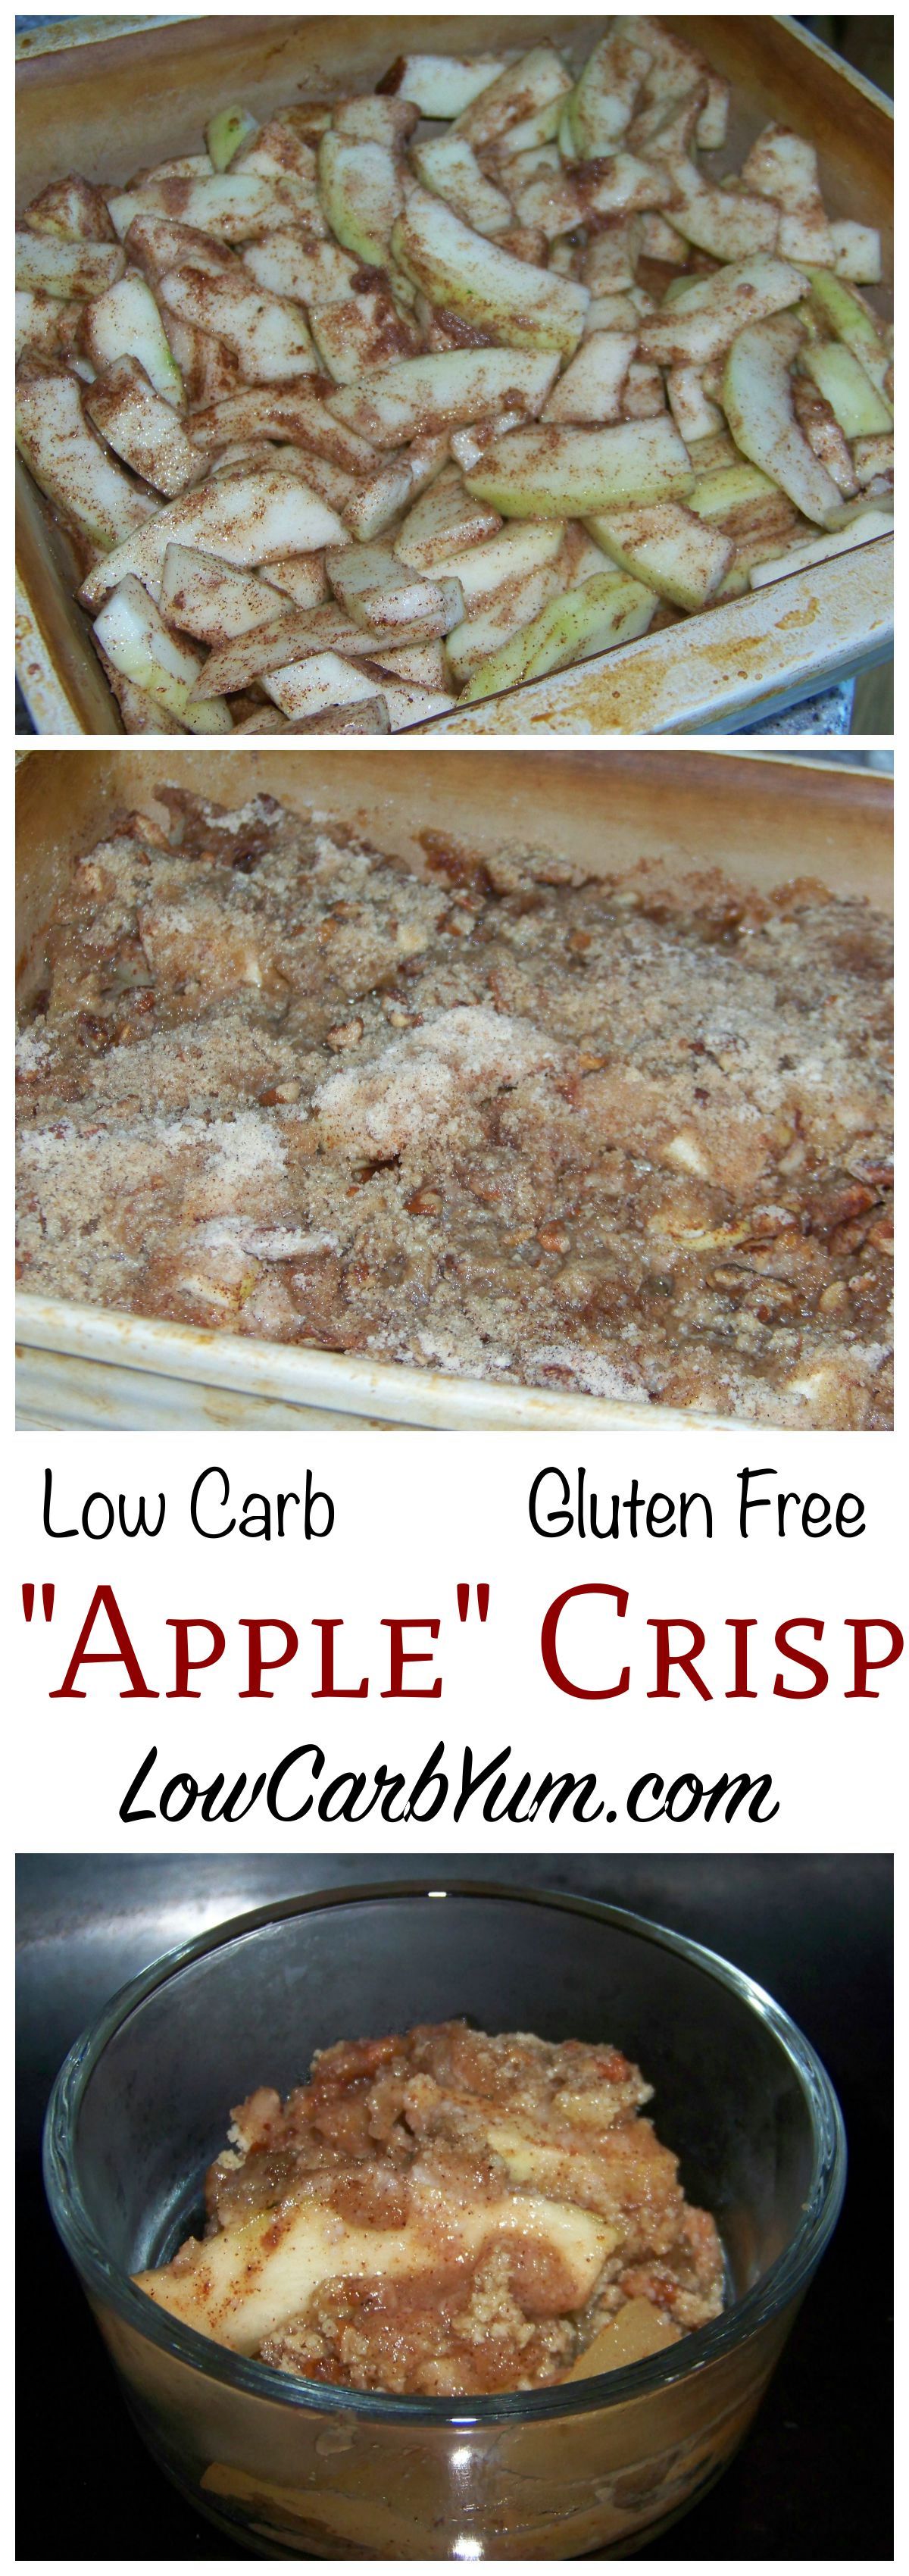 Apples are a forbidden fruit on the low carb diet, but this gluten free mock apple crisp using zucchini is a clever way to trick your taste buds when you crave apples. -   24 diabetic apple recipes
 ideas